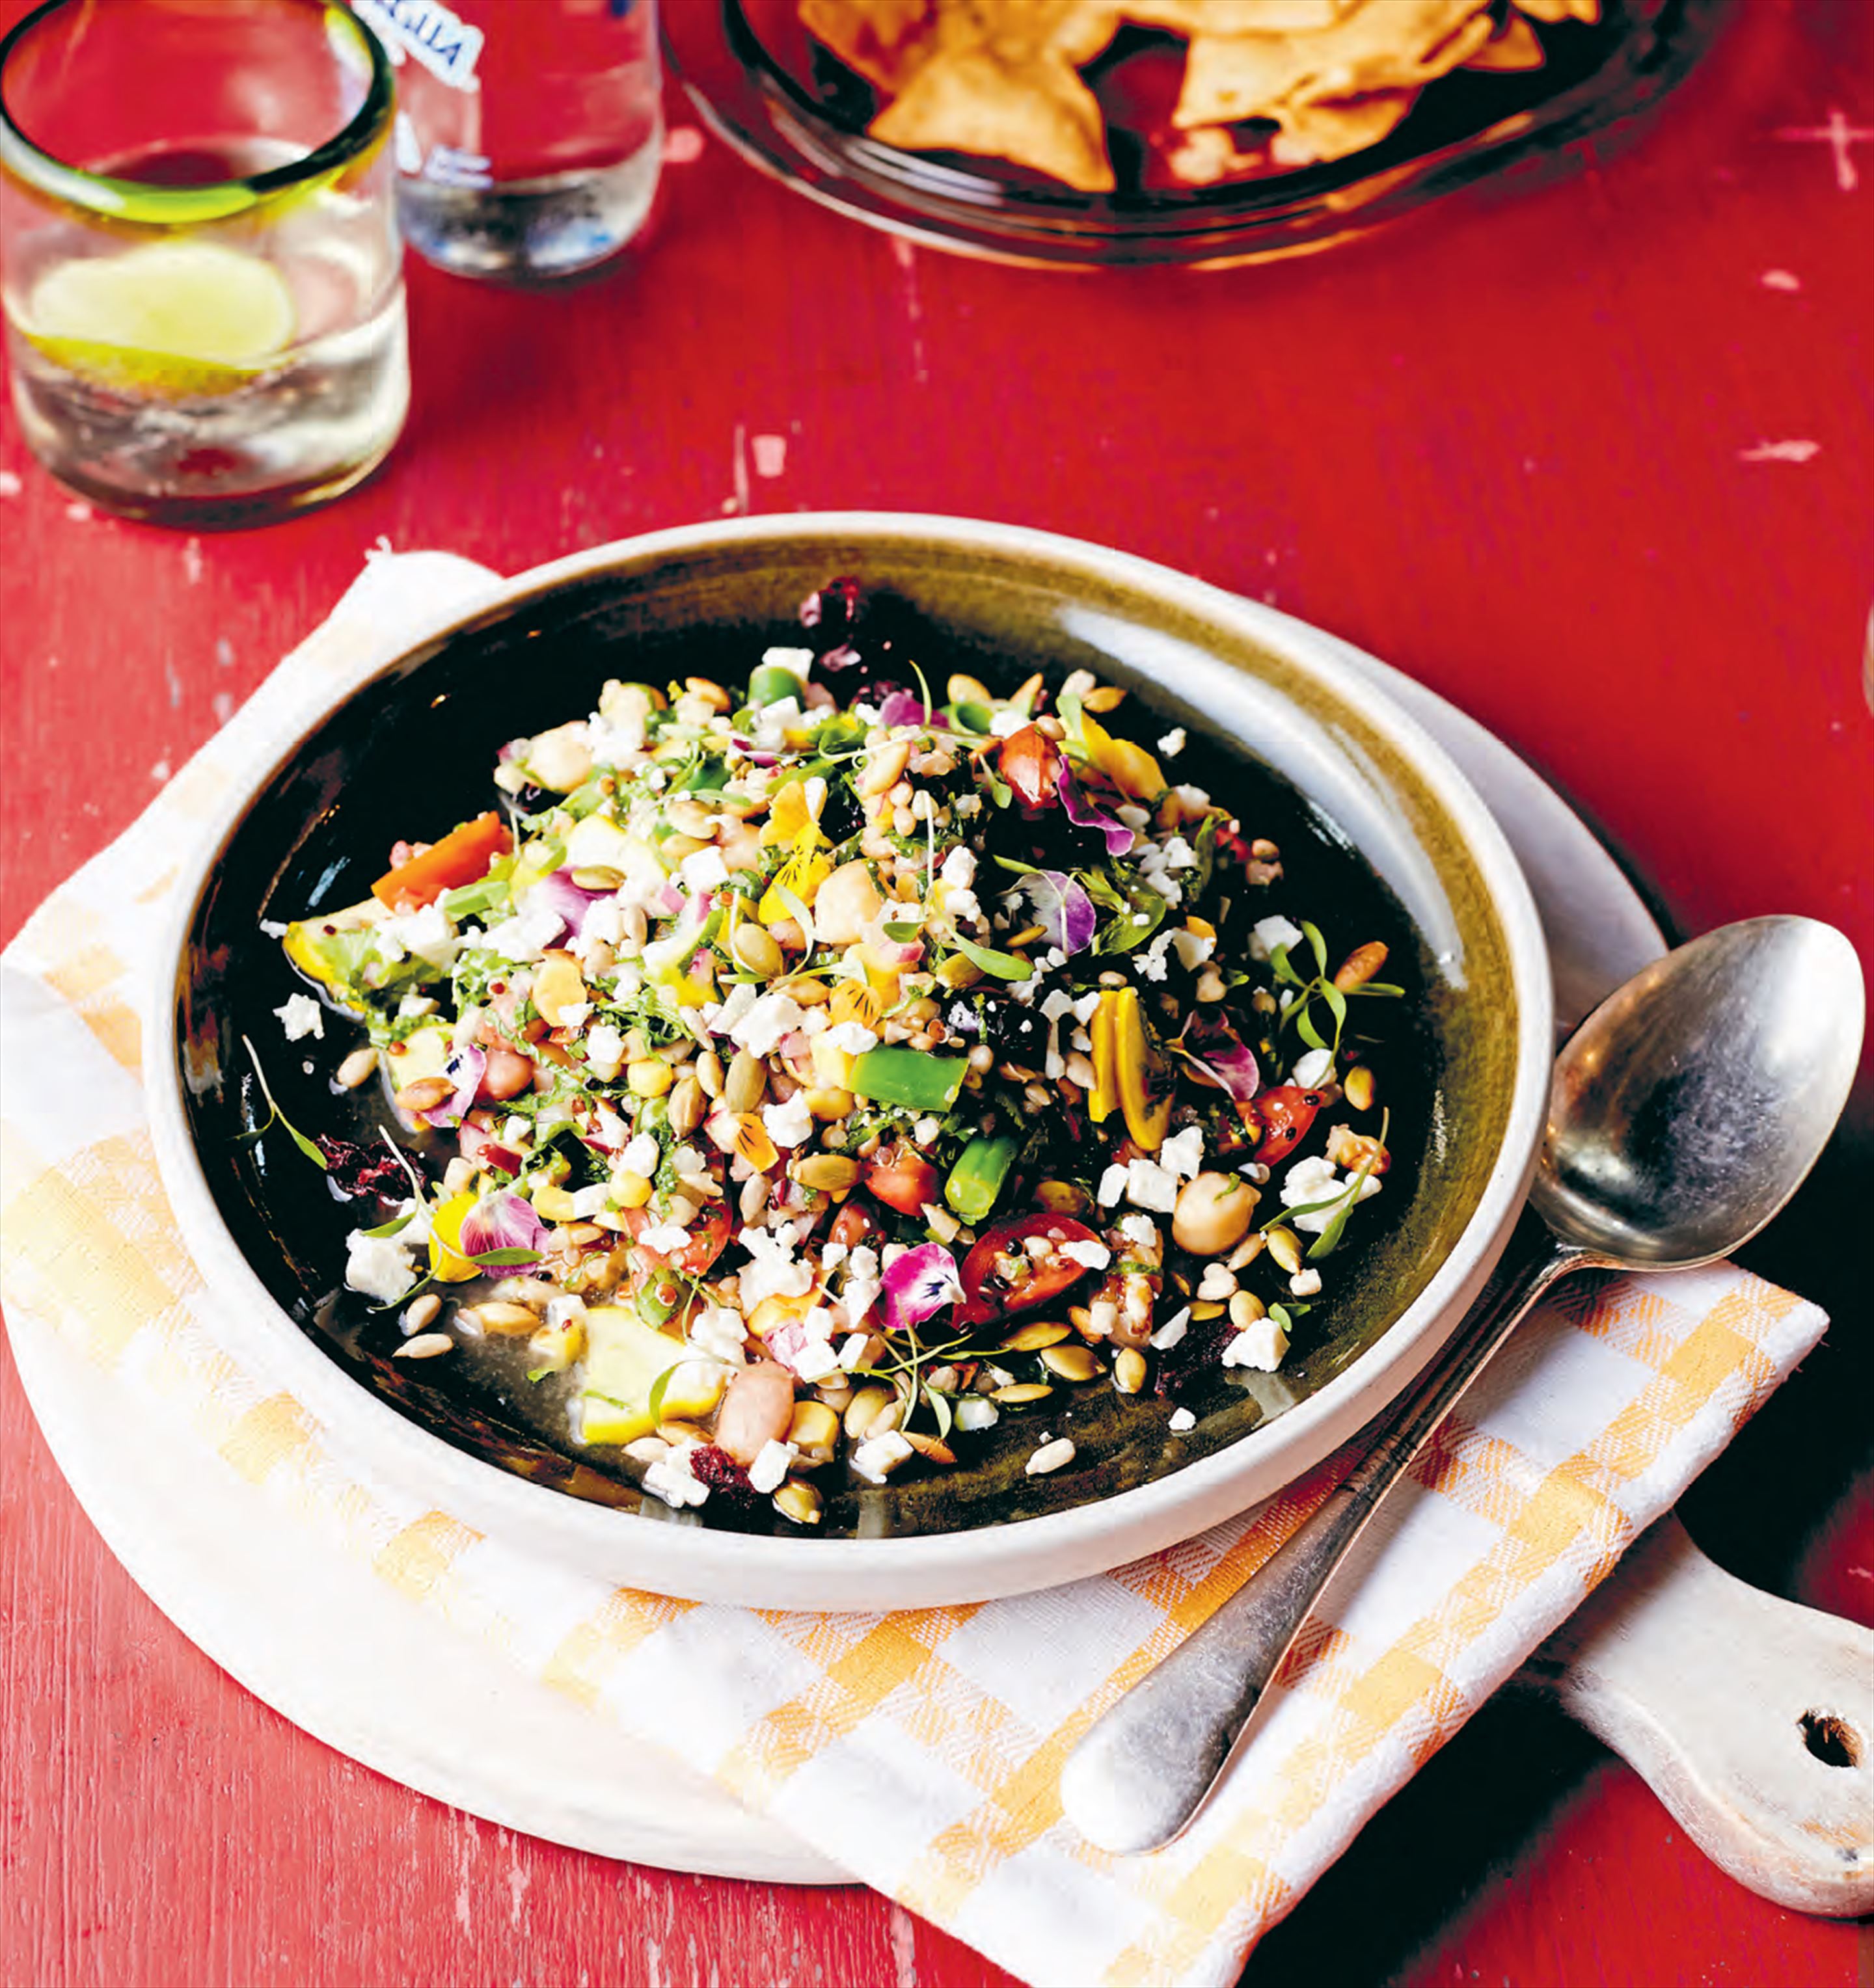 Super squash salad with grains, seeds & pulses